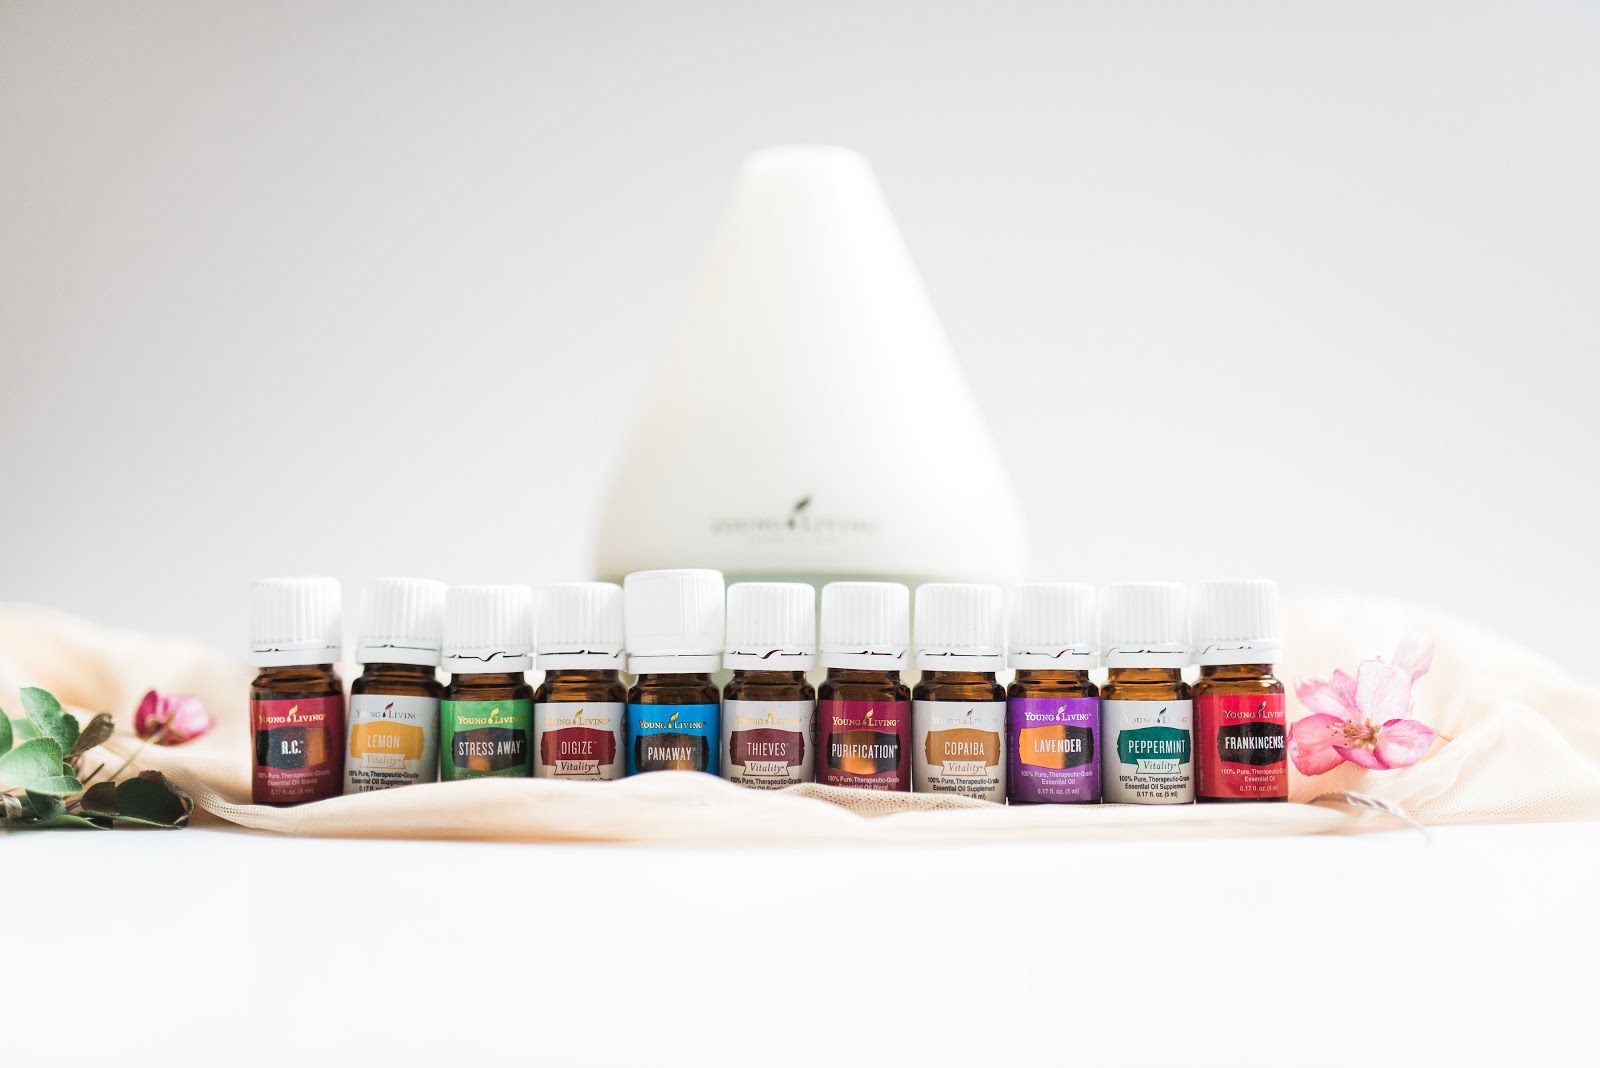 My Oily Blog and All About Essential Oils